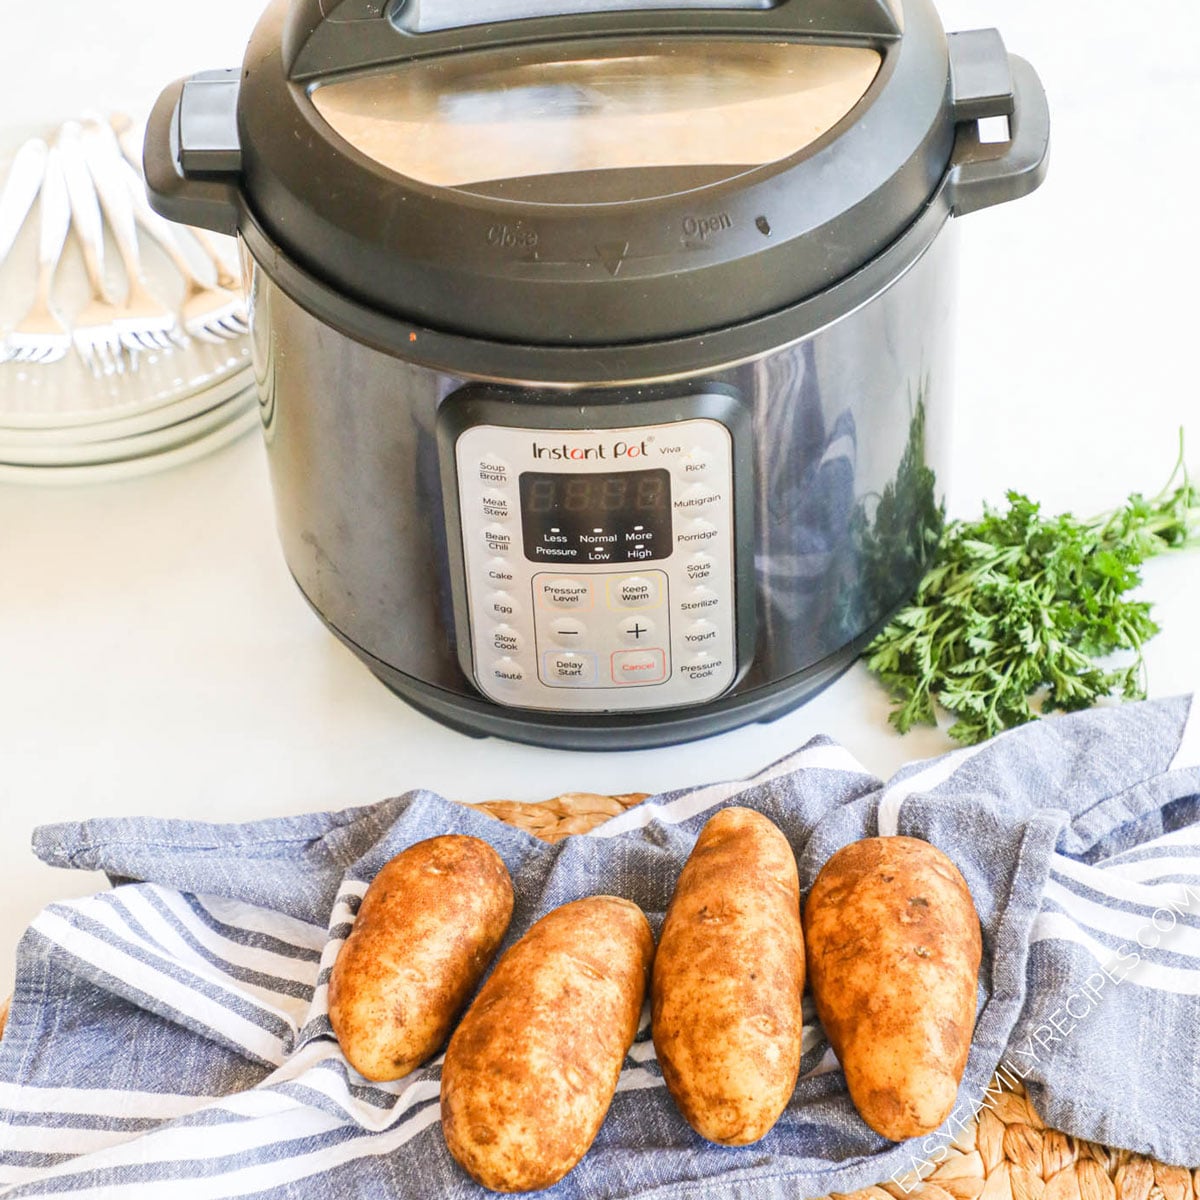 Ingredients to make instant pot baked potatoes including russet potatoes, water, and Instant Pot.